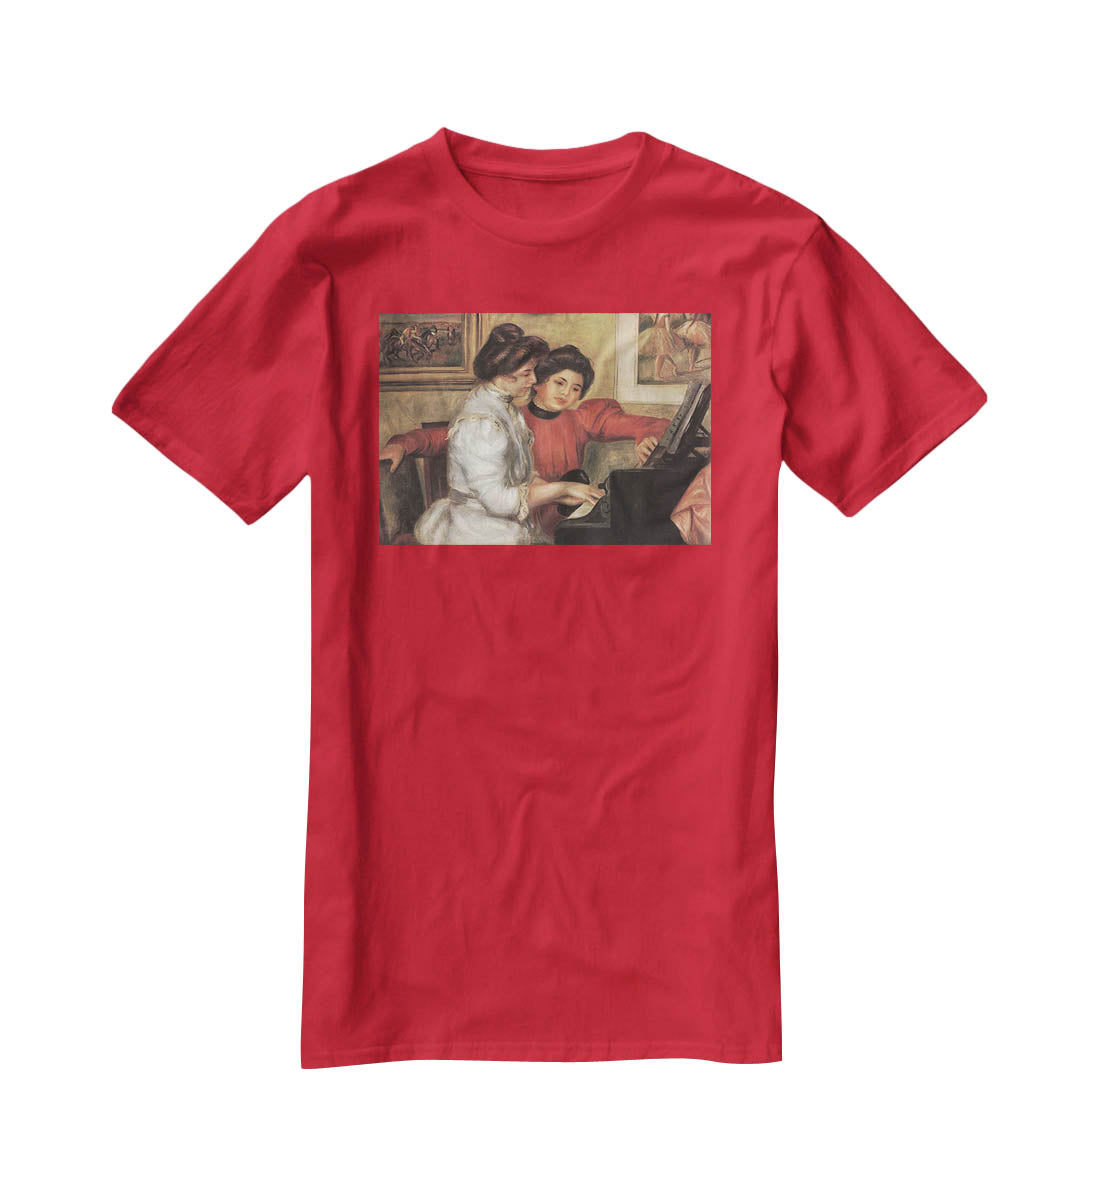 Yvonne and Christine Lerolle at the piano by Renoir T-Shirt - Canvas Art Rocks - 4